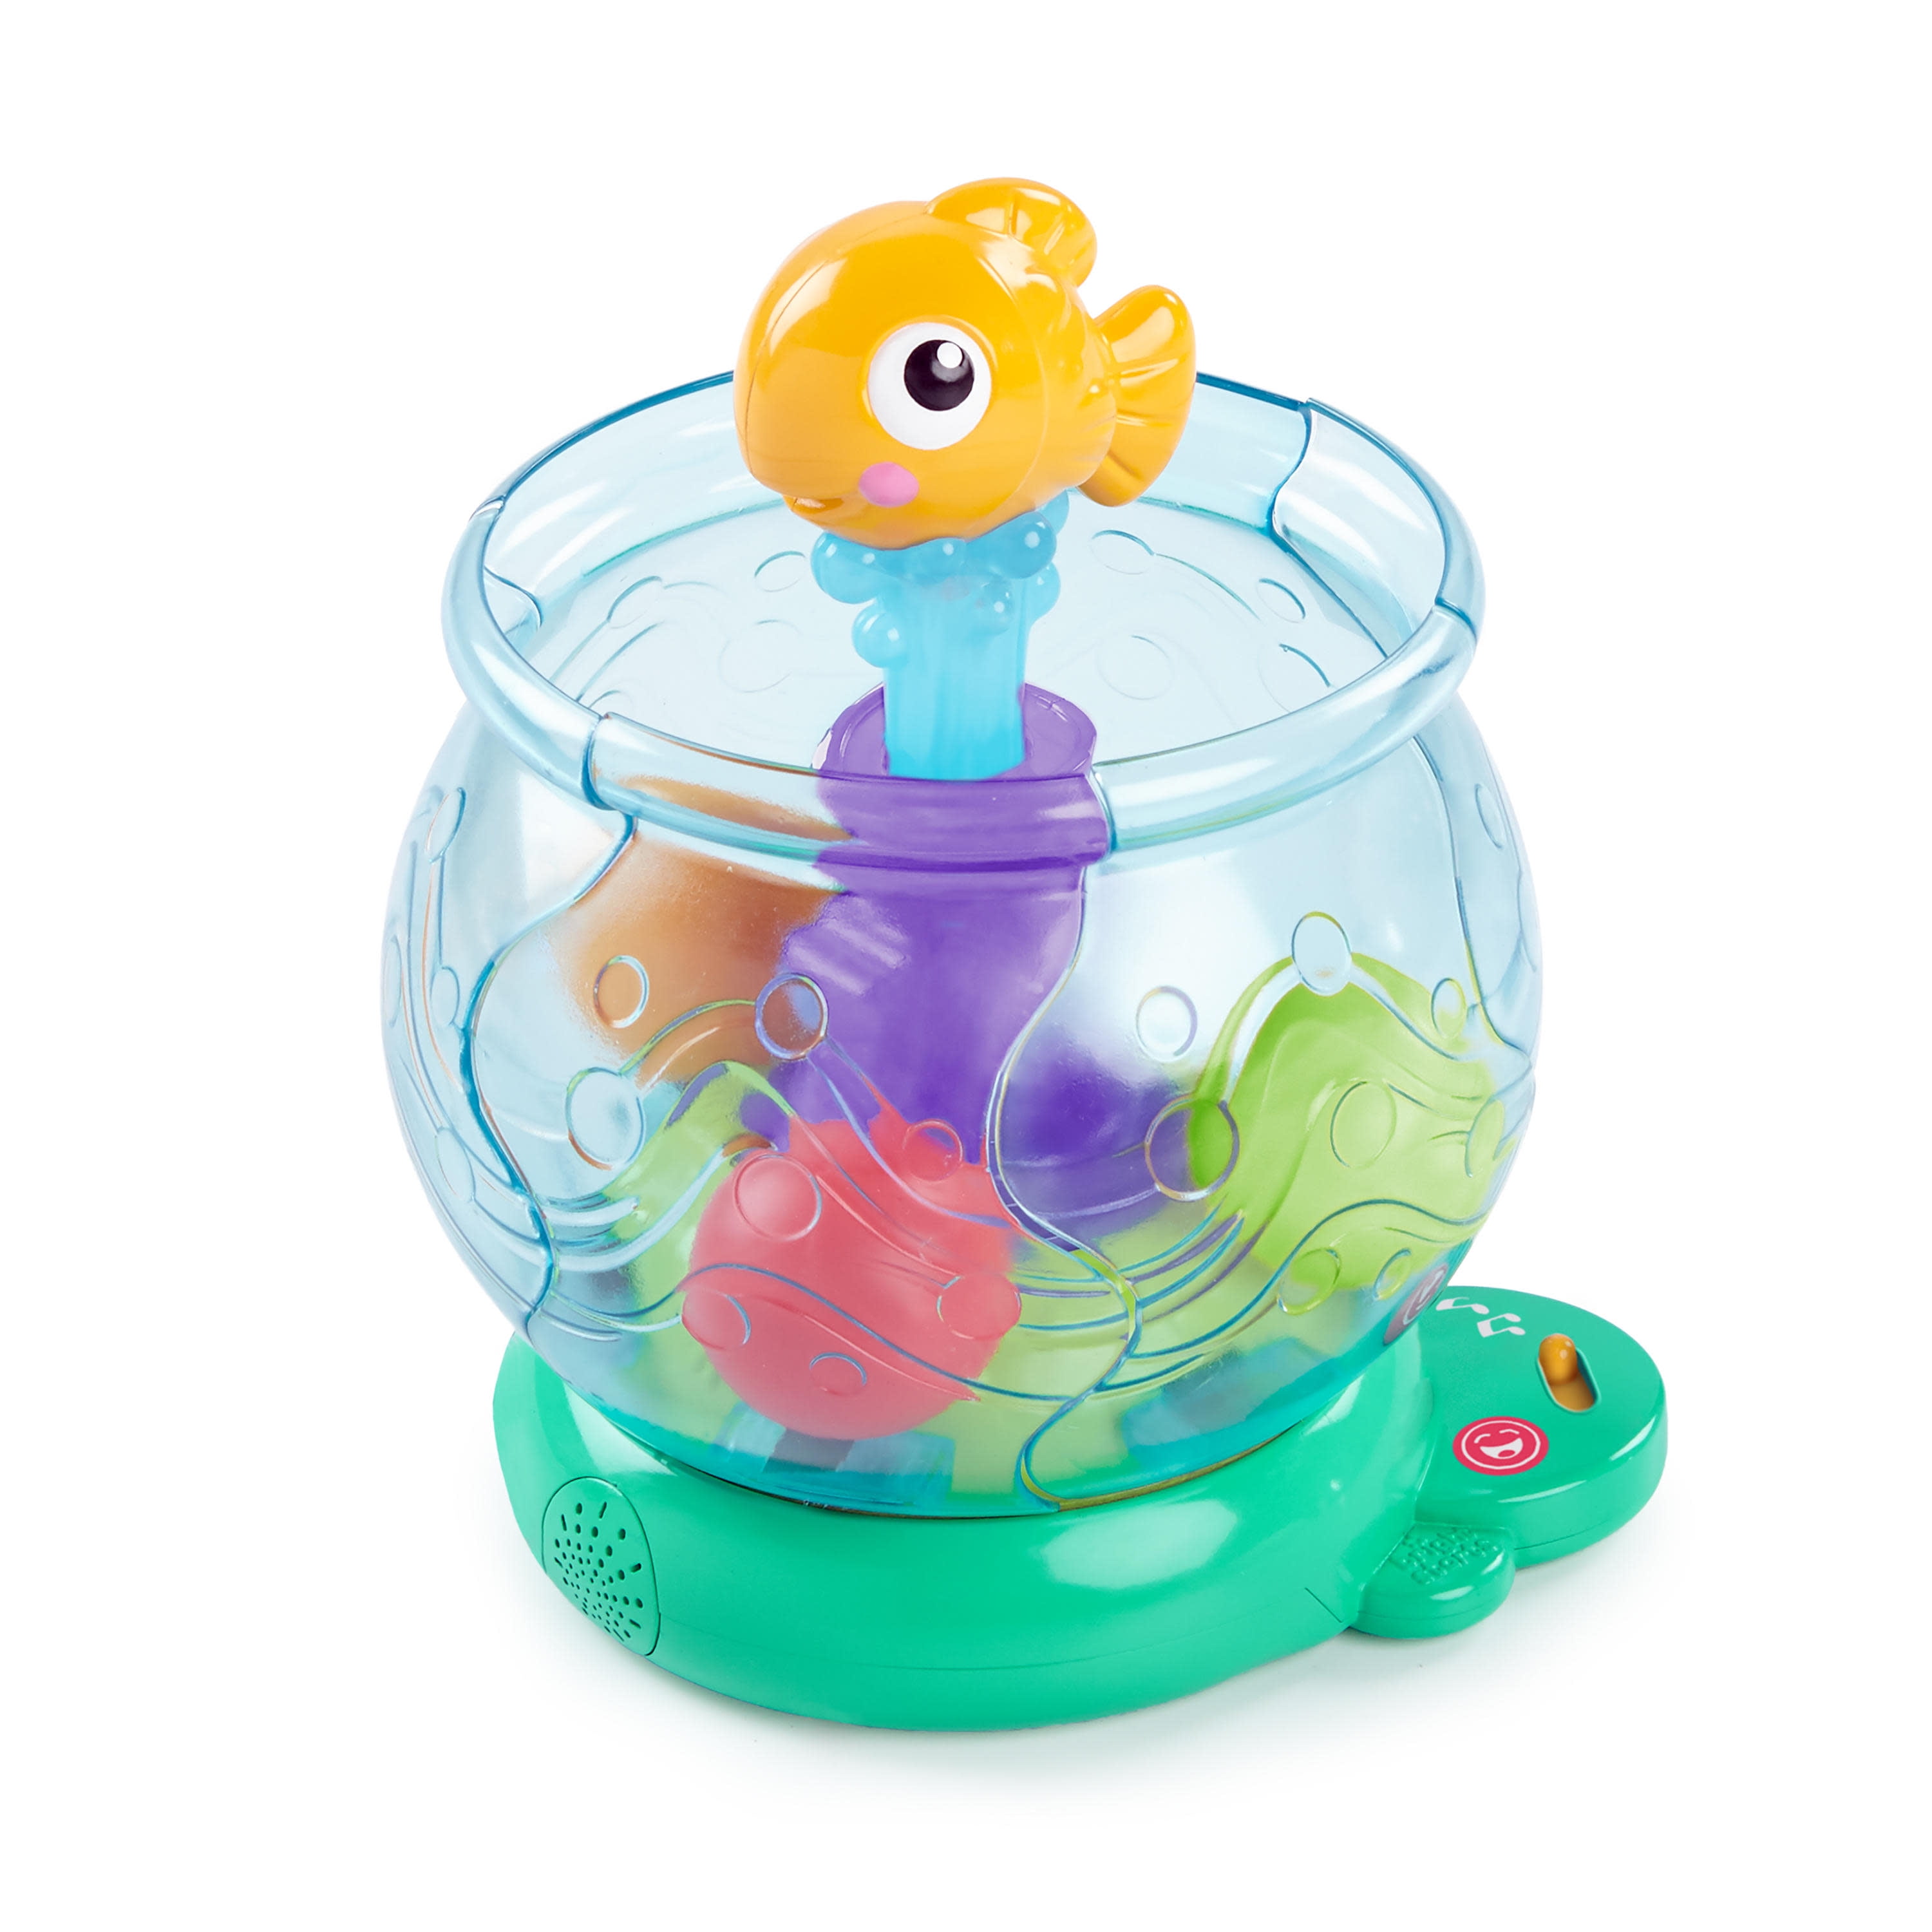 Bright Starts Funny Fishbowl Ball Popper Musical Activity Toy with Lights,  Ages 12 months +